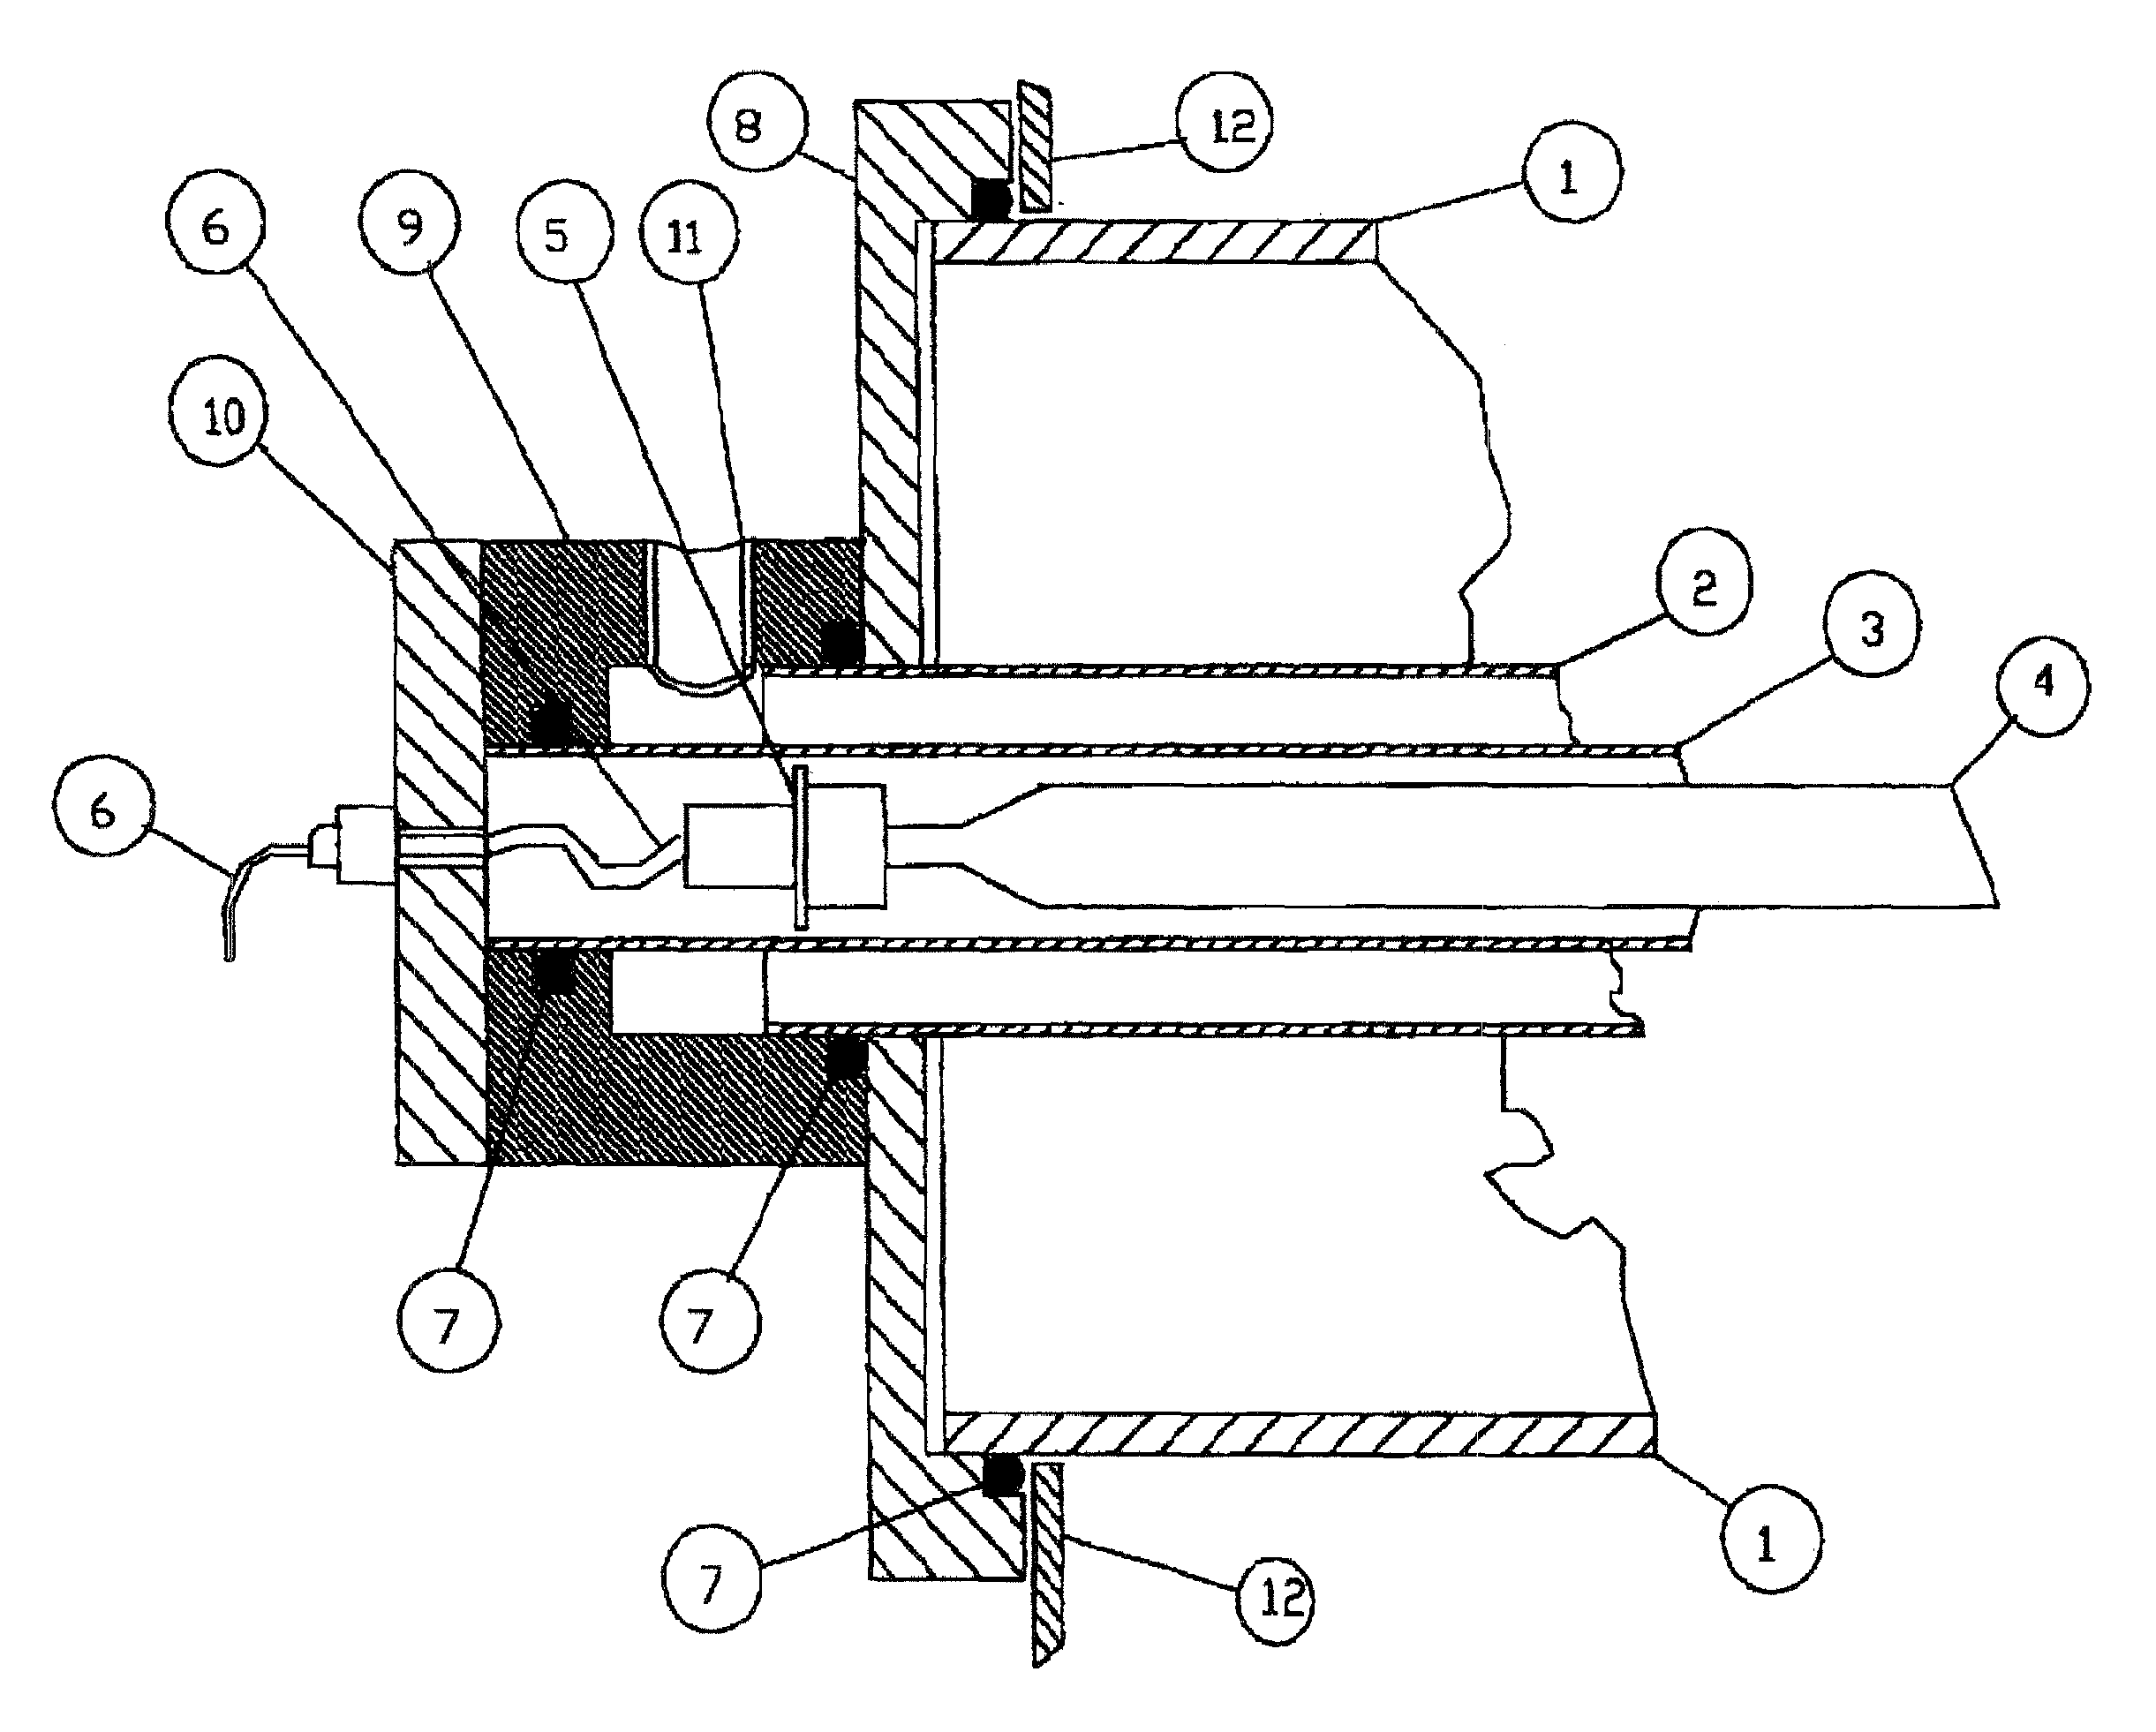 Device for irradiating liquids with UV radiation in a throughflow